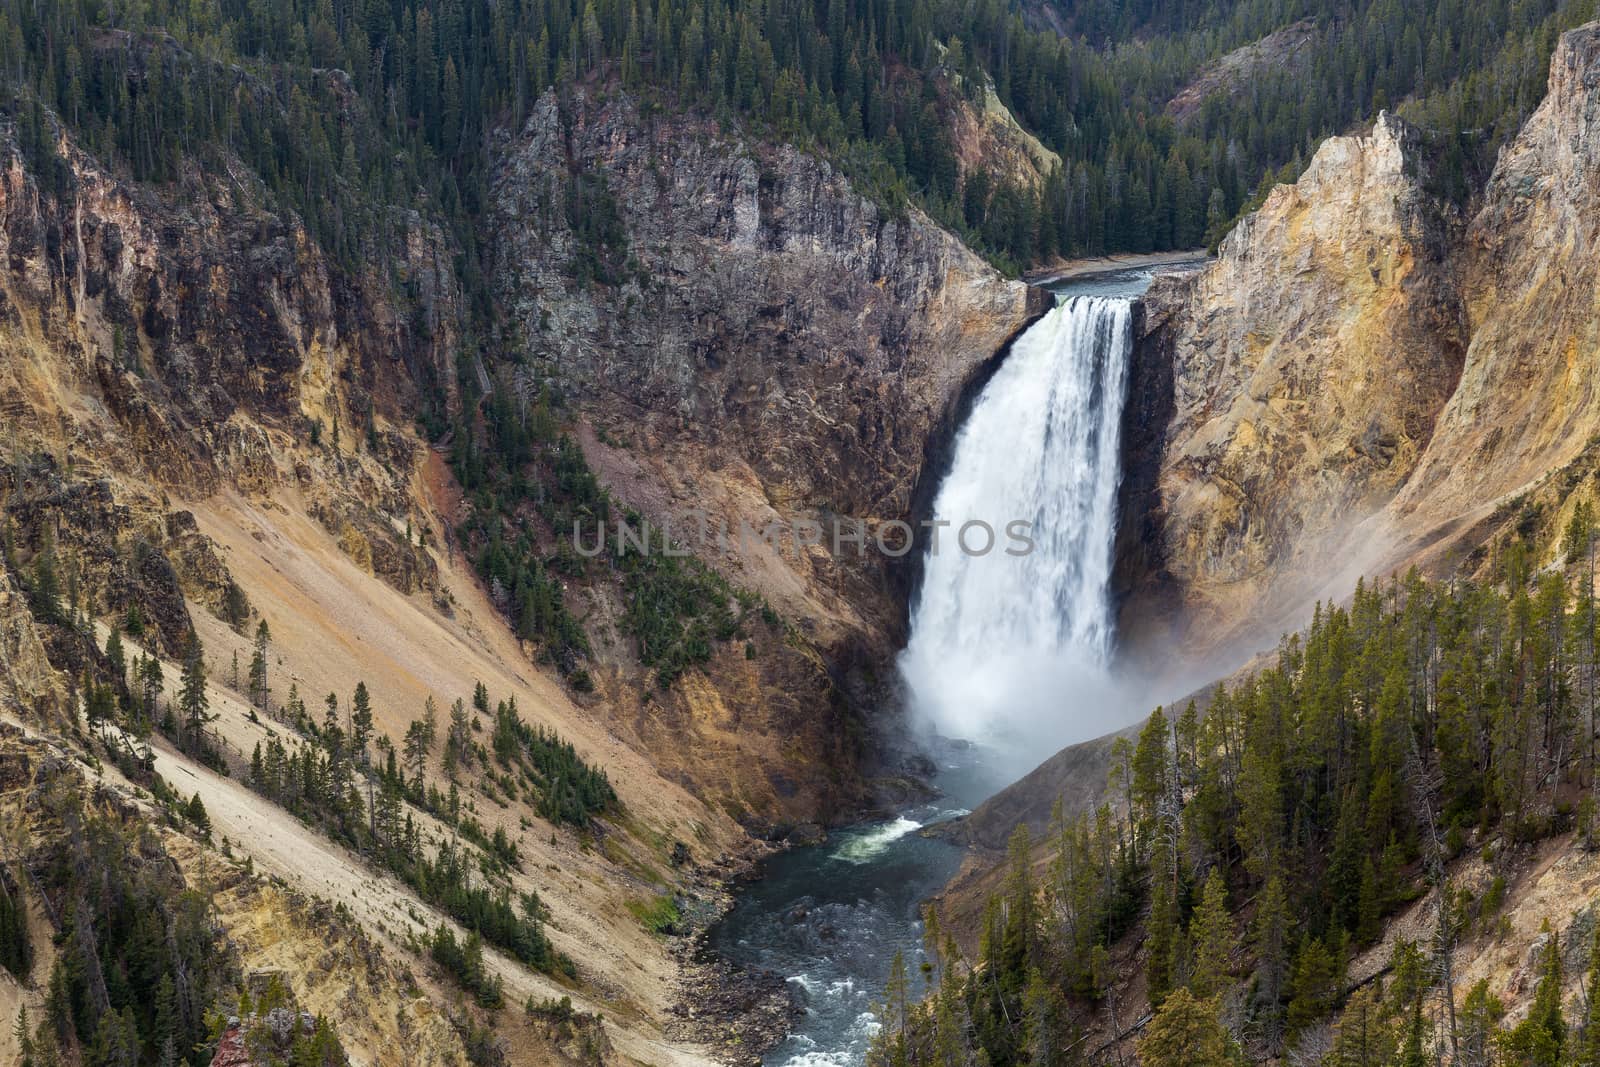 The Lower Falls of the Grand Canyon of Yellowstone National Park.